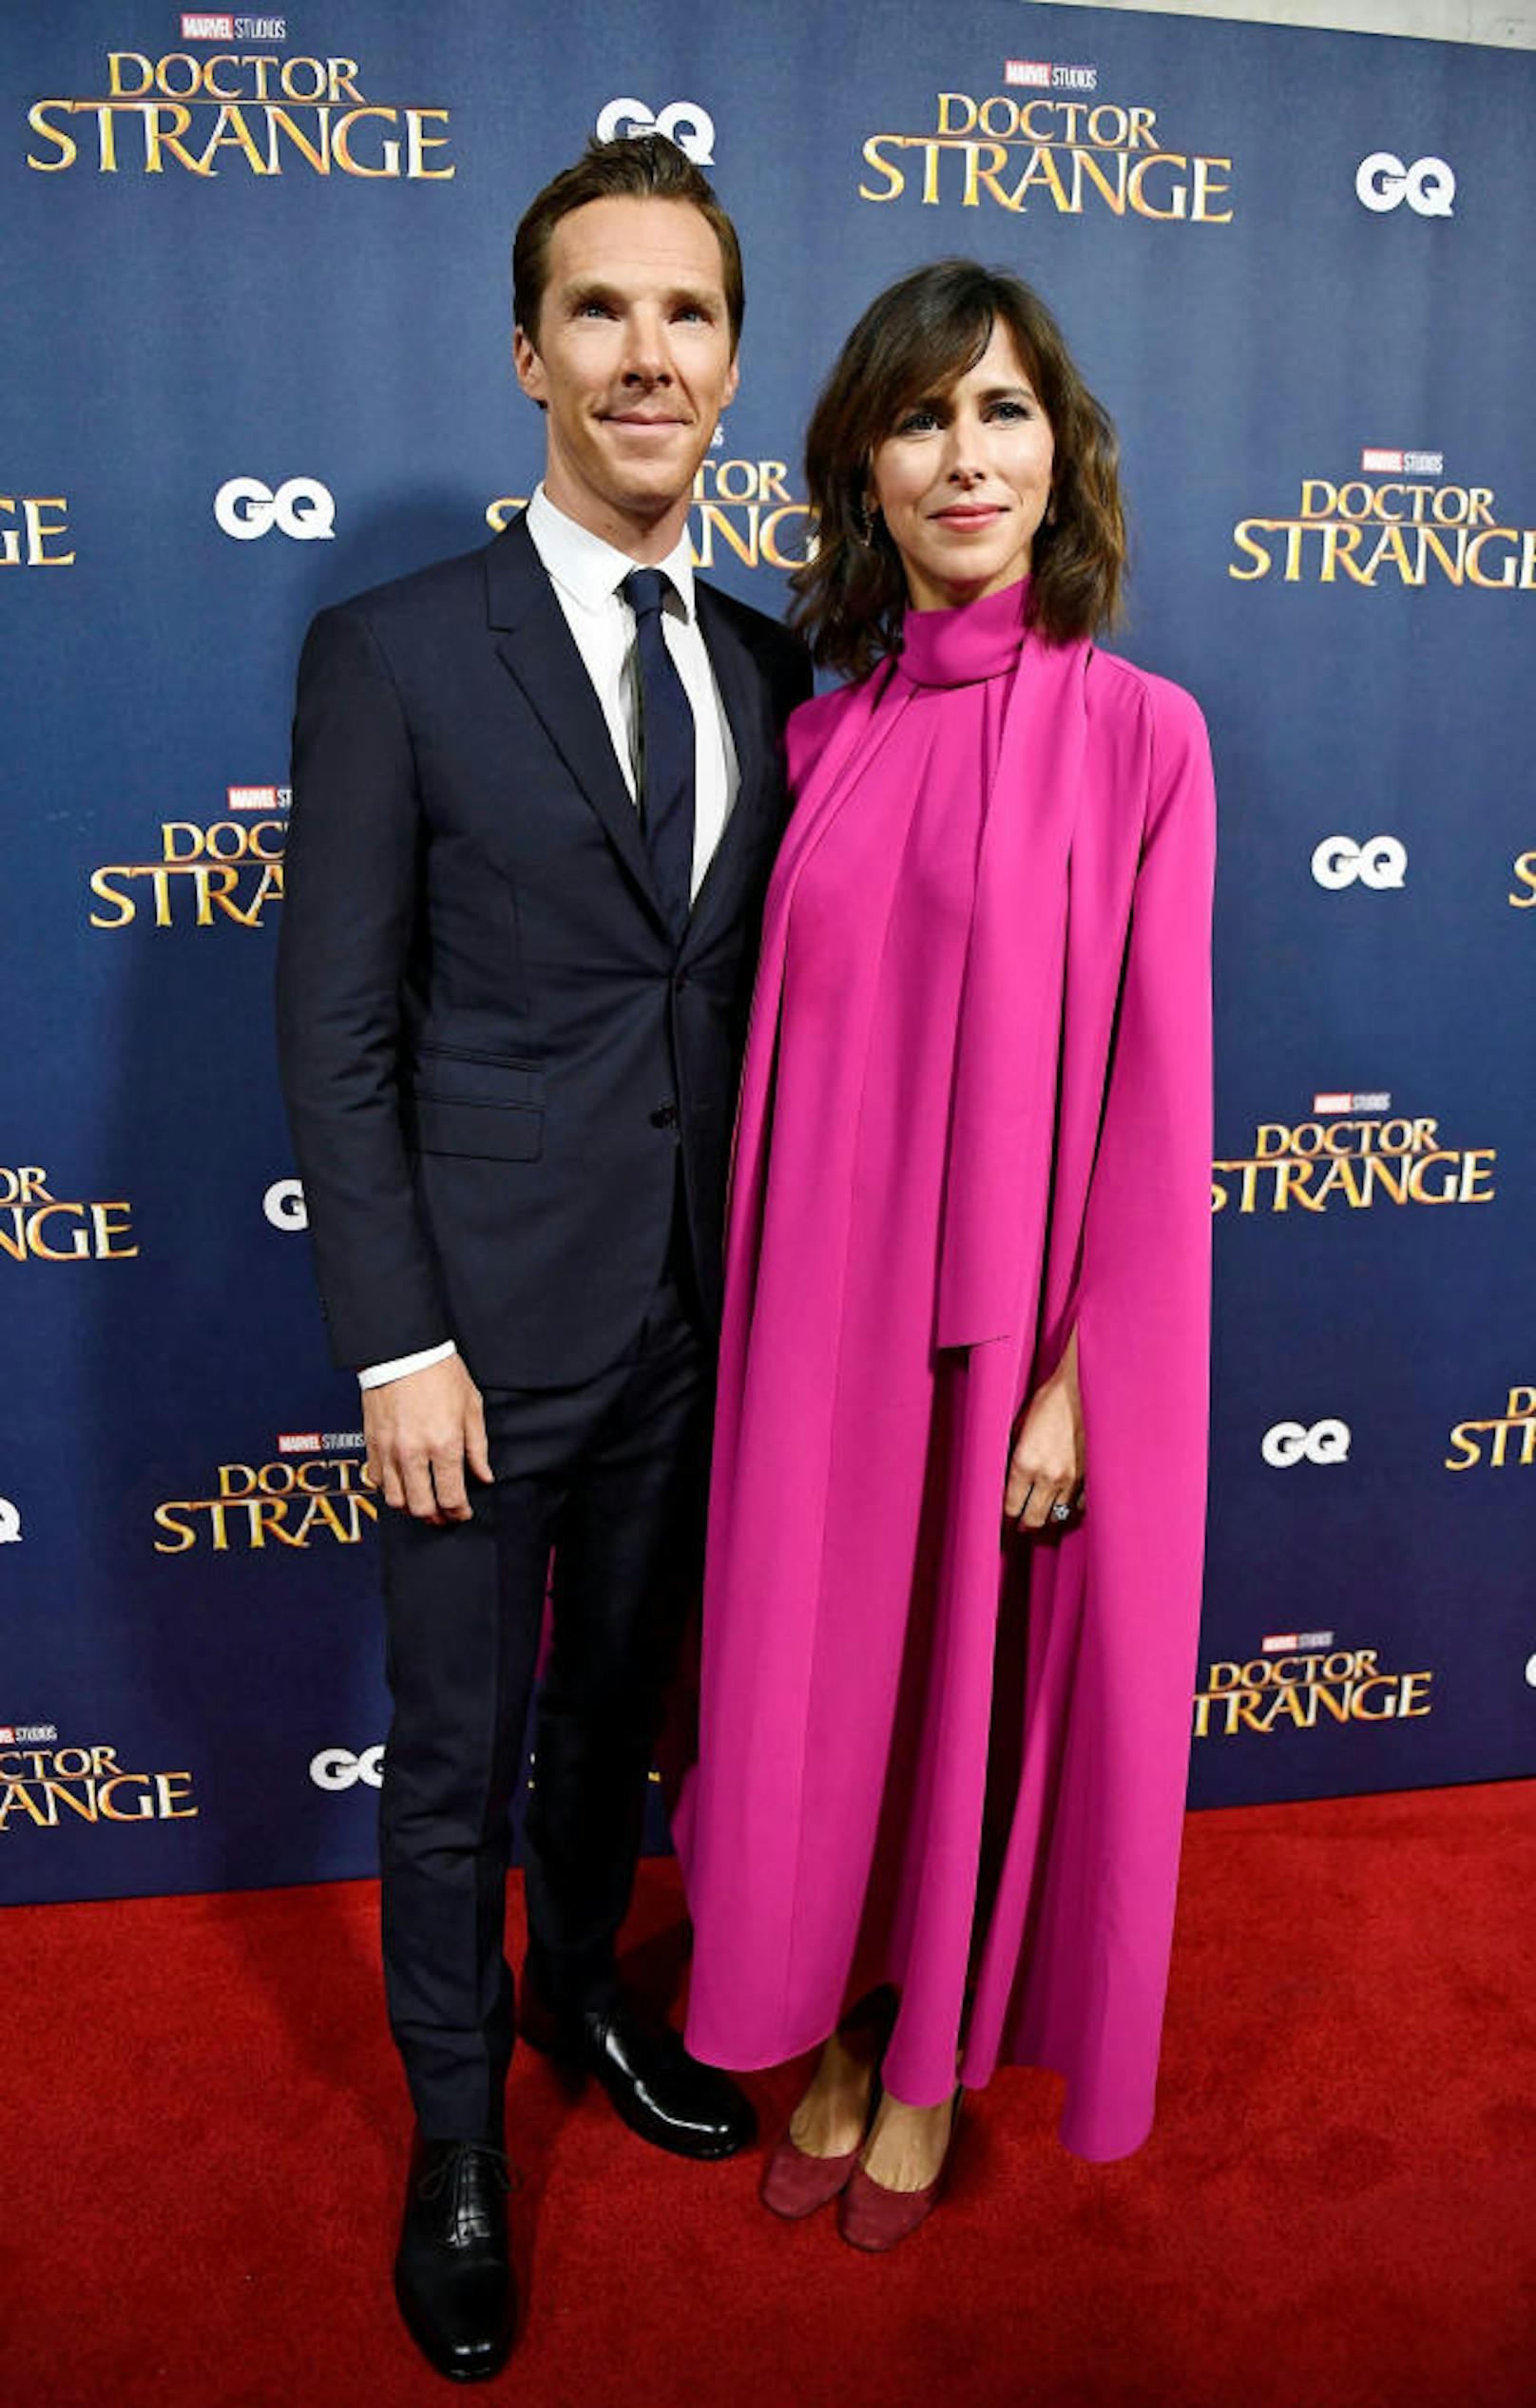 Benedict Cumberbatch poses with his wife Sophie Hunter as he arrives at the launch event of "Doctor Strange" at Westminster Abbey in London, Britain October 24, 2016. REUTERS/Dylan Martinez  - RTX2Q9K2